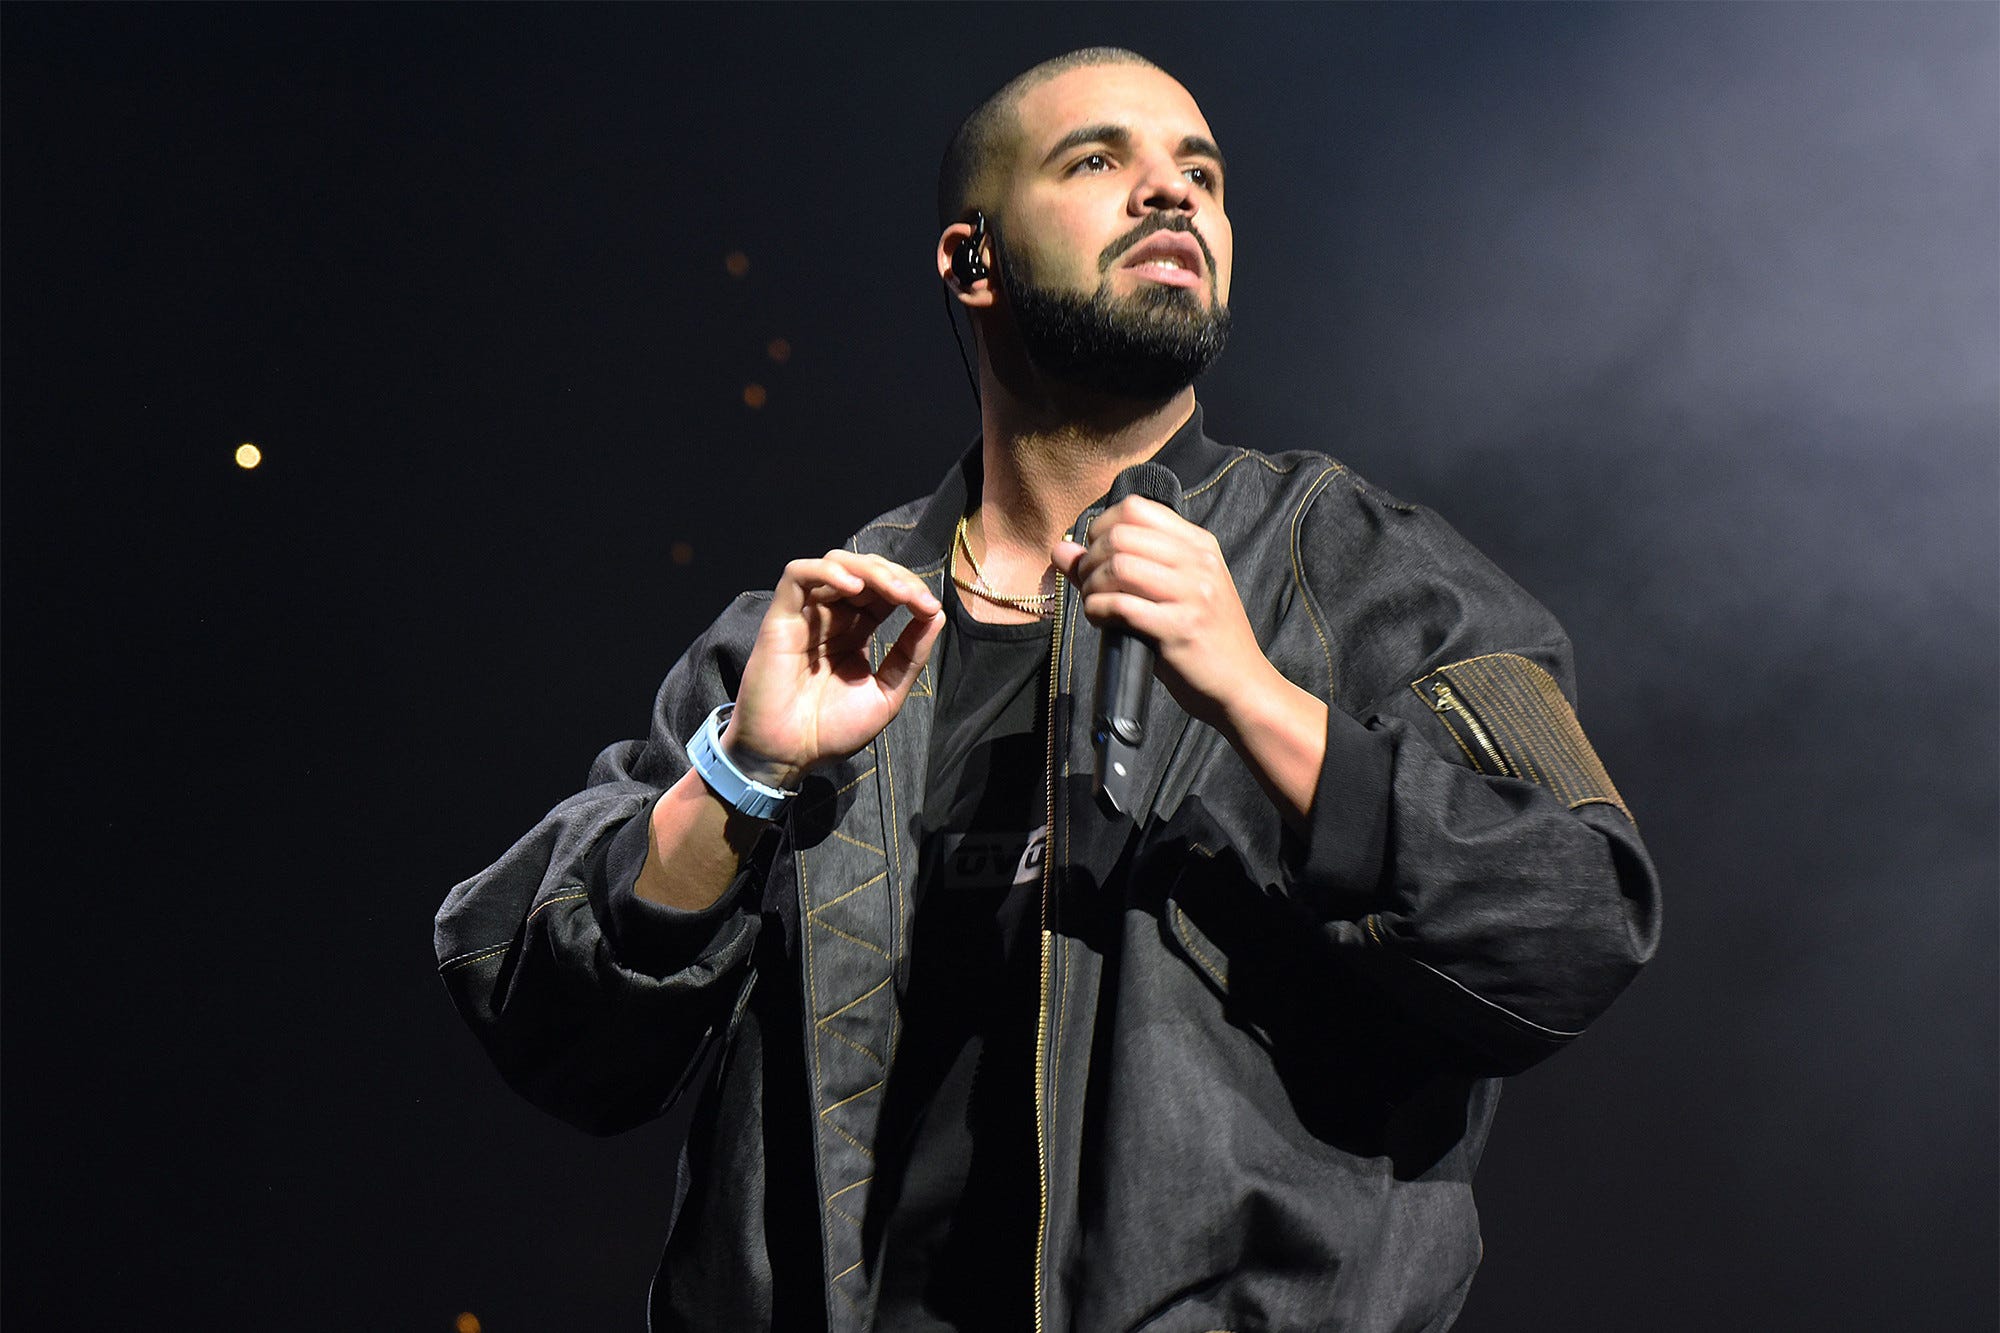 How to Build a Killer Social Media Presence like Drake and Louis Vuitton to  Win (2019 Social Media Exclusive Access), by Sammy Singh